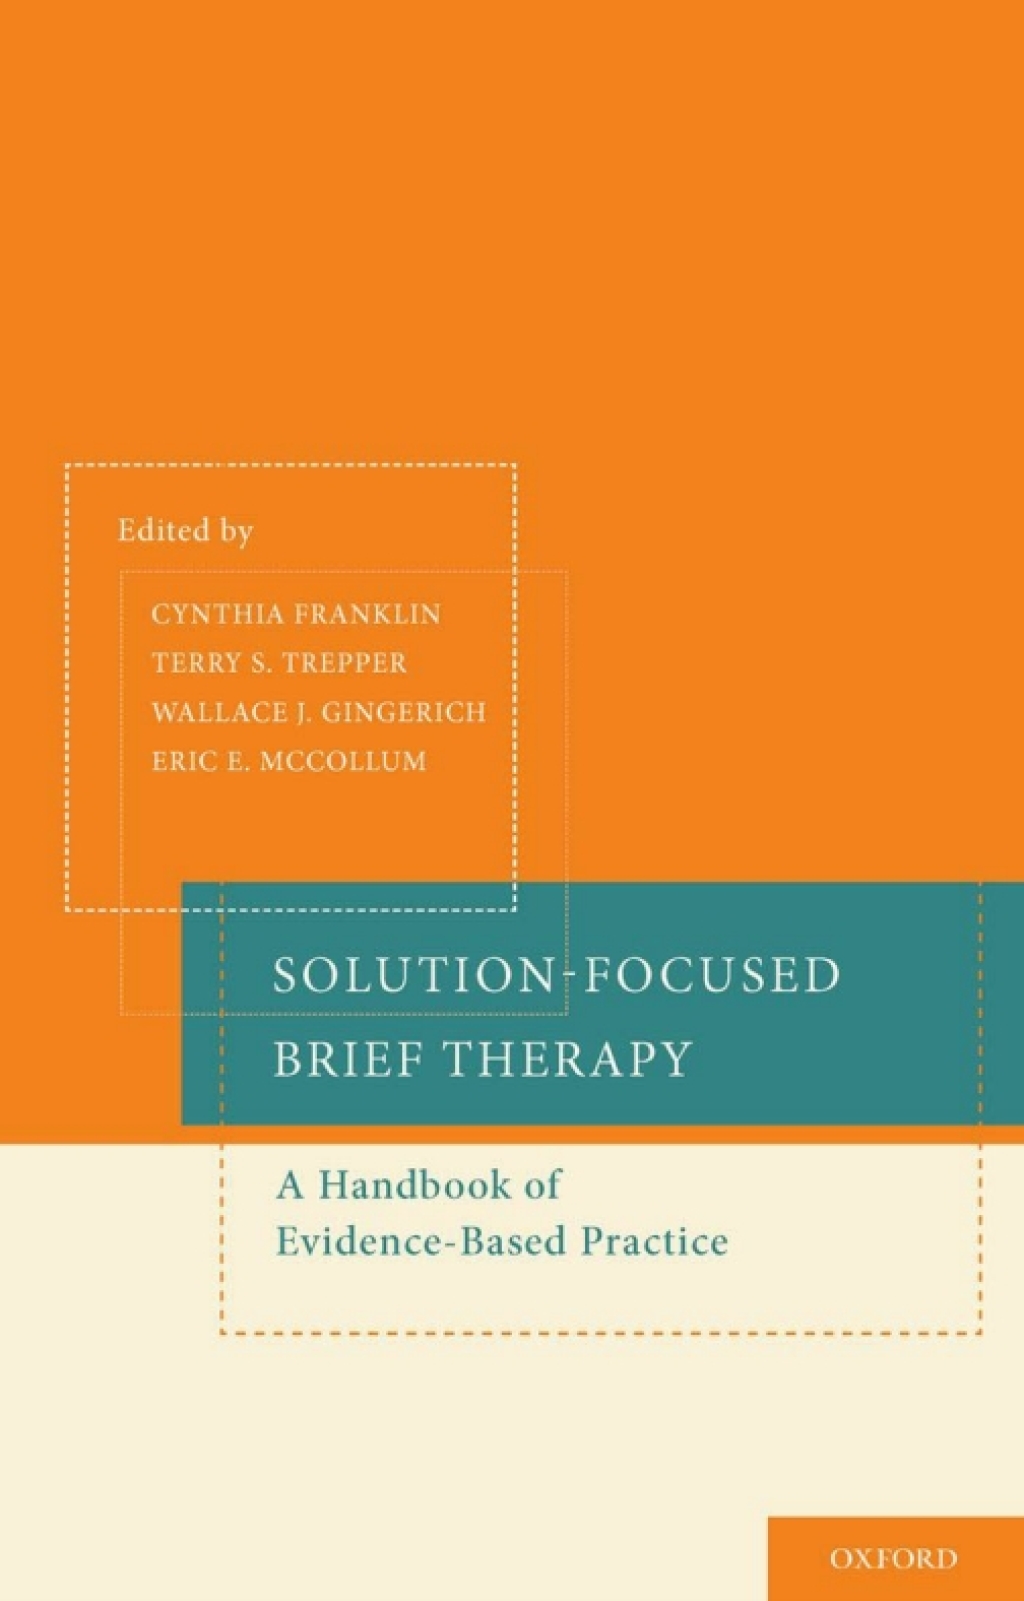 Solution-Focused Brief Therapy (eBook Rental) - Cynthia Franklin;  Terry S. Trepper;  Eric E. McCollum;  Wallace J. Gingerich,